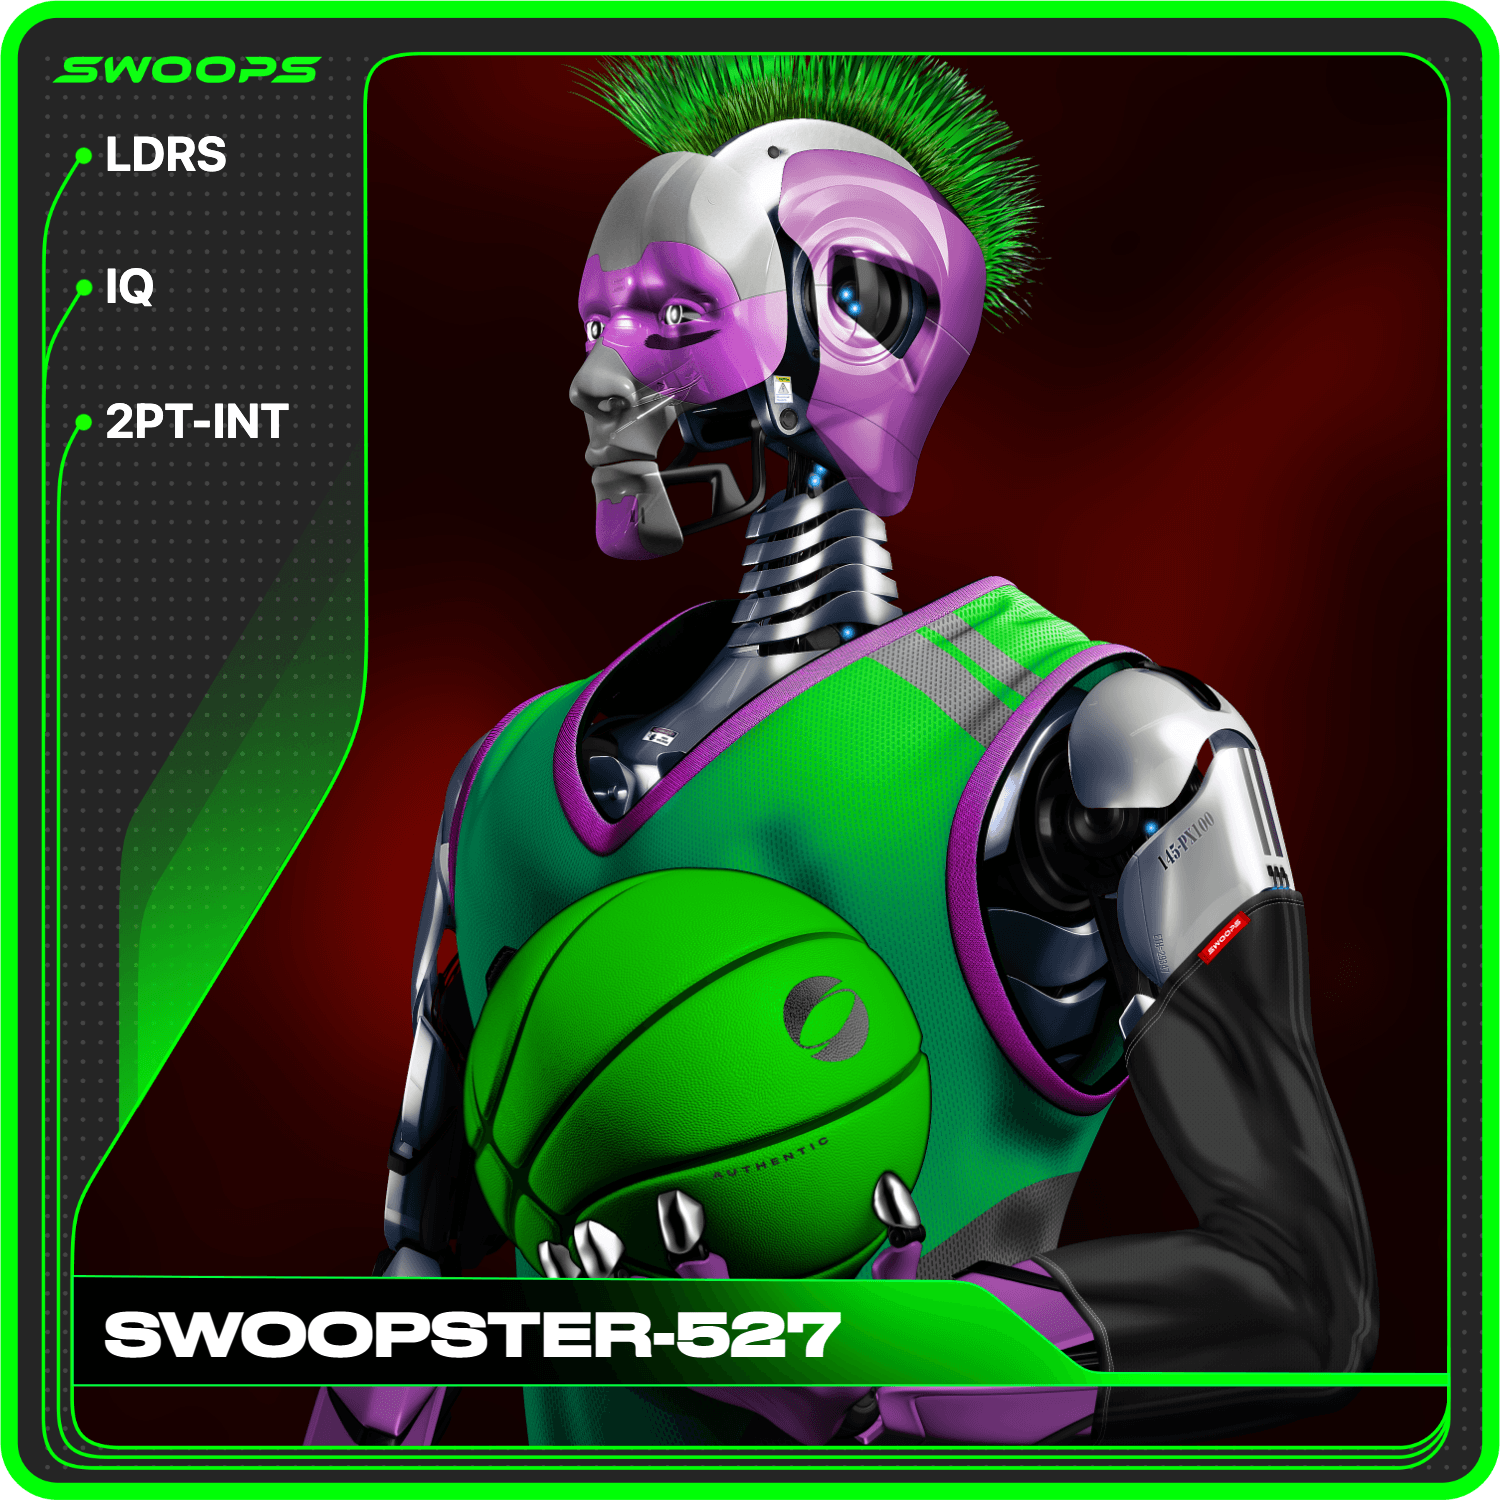 SWOOPSTER-527